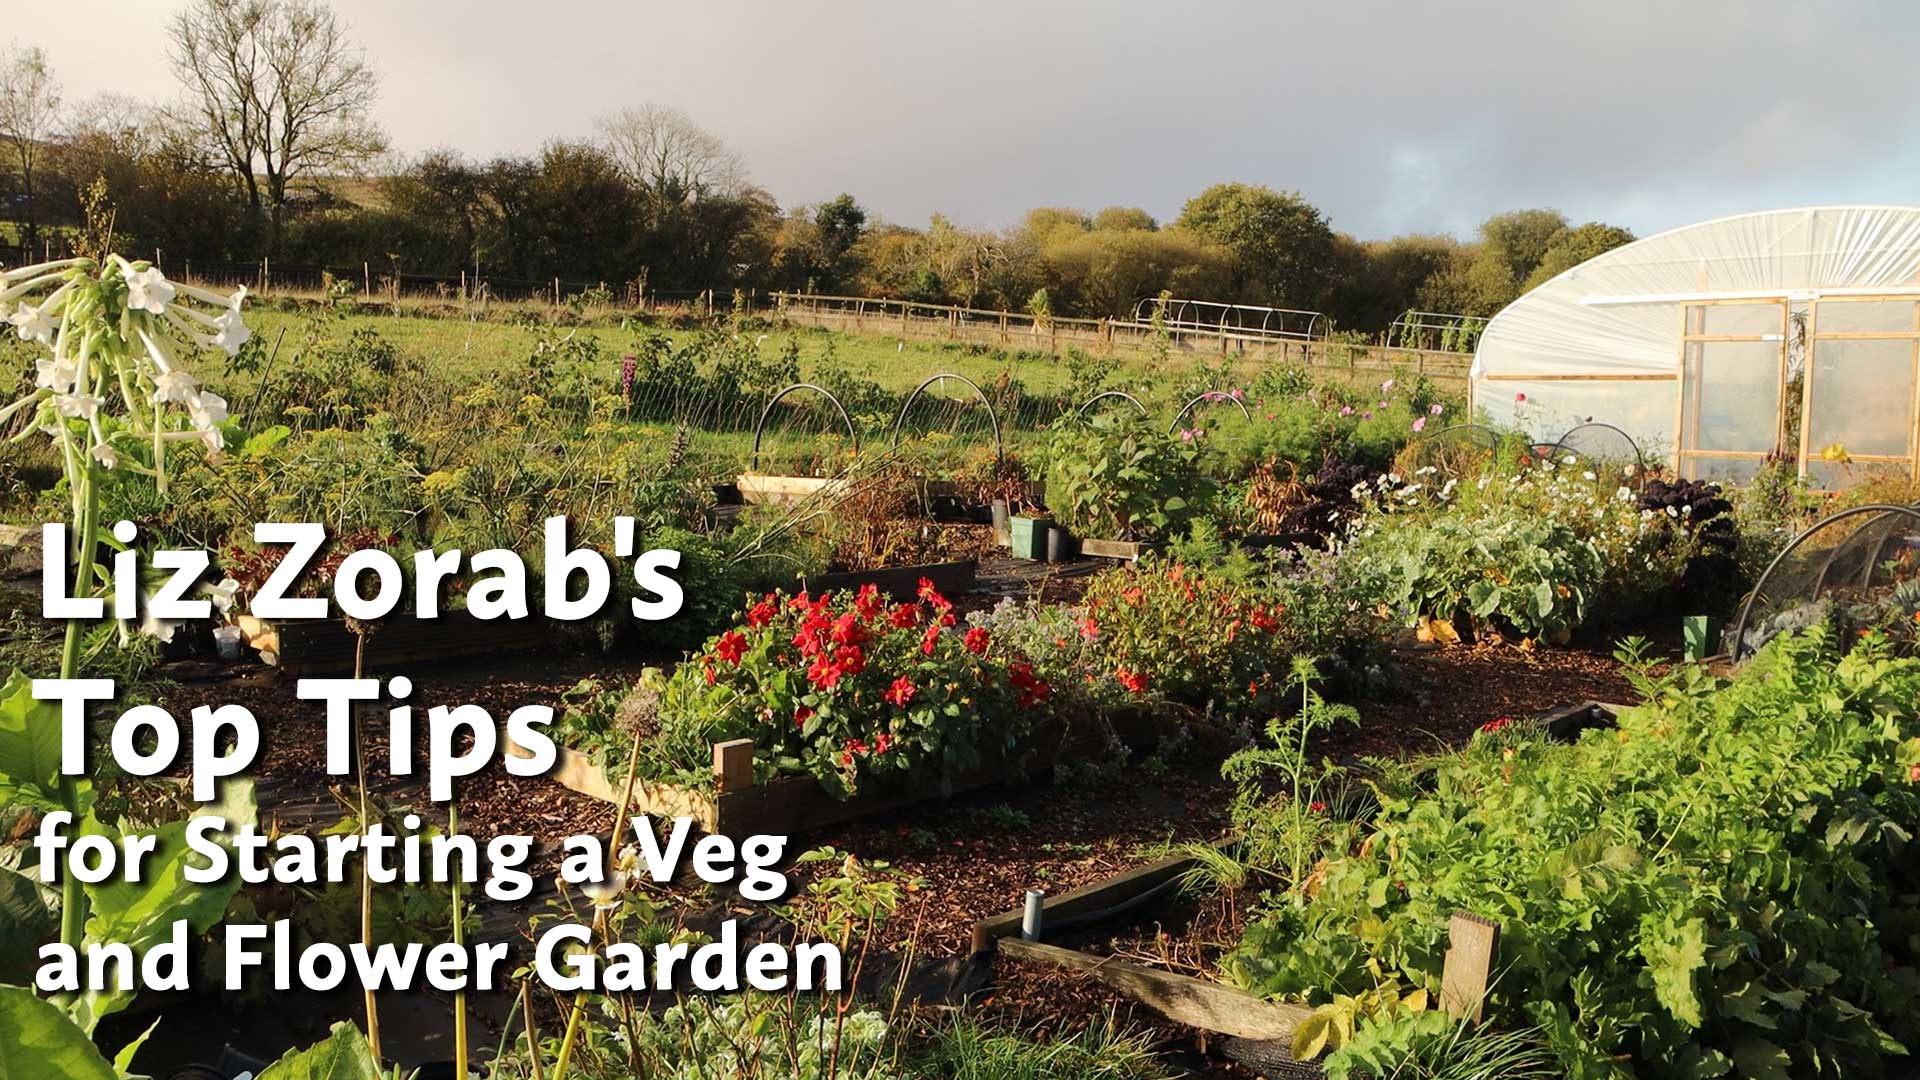 Top Tips for Starting a Veg and Flower Garden with Liz Zorab